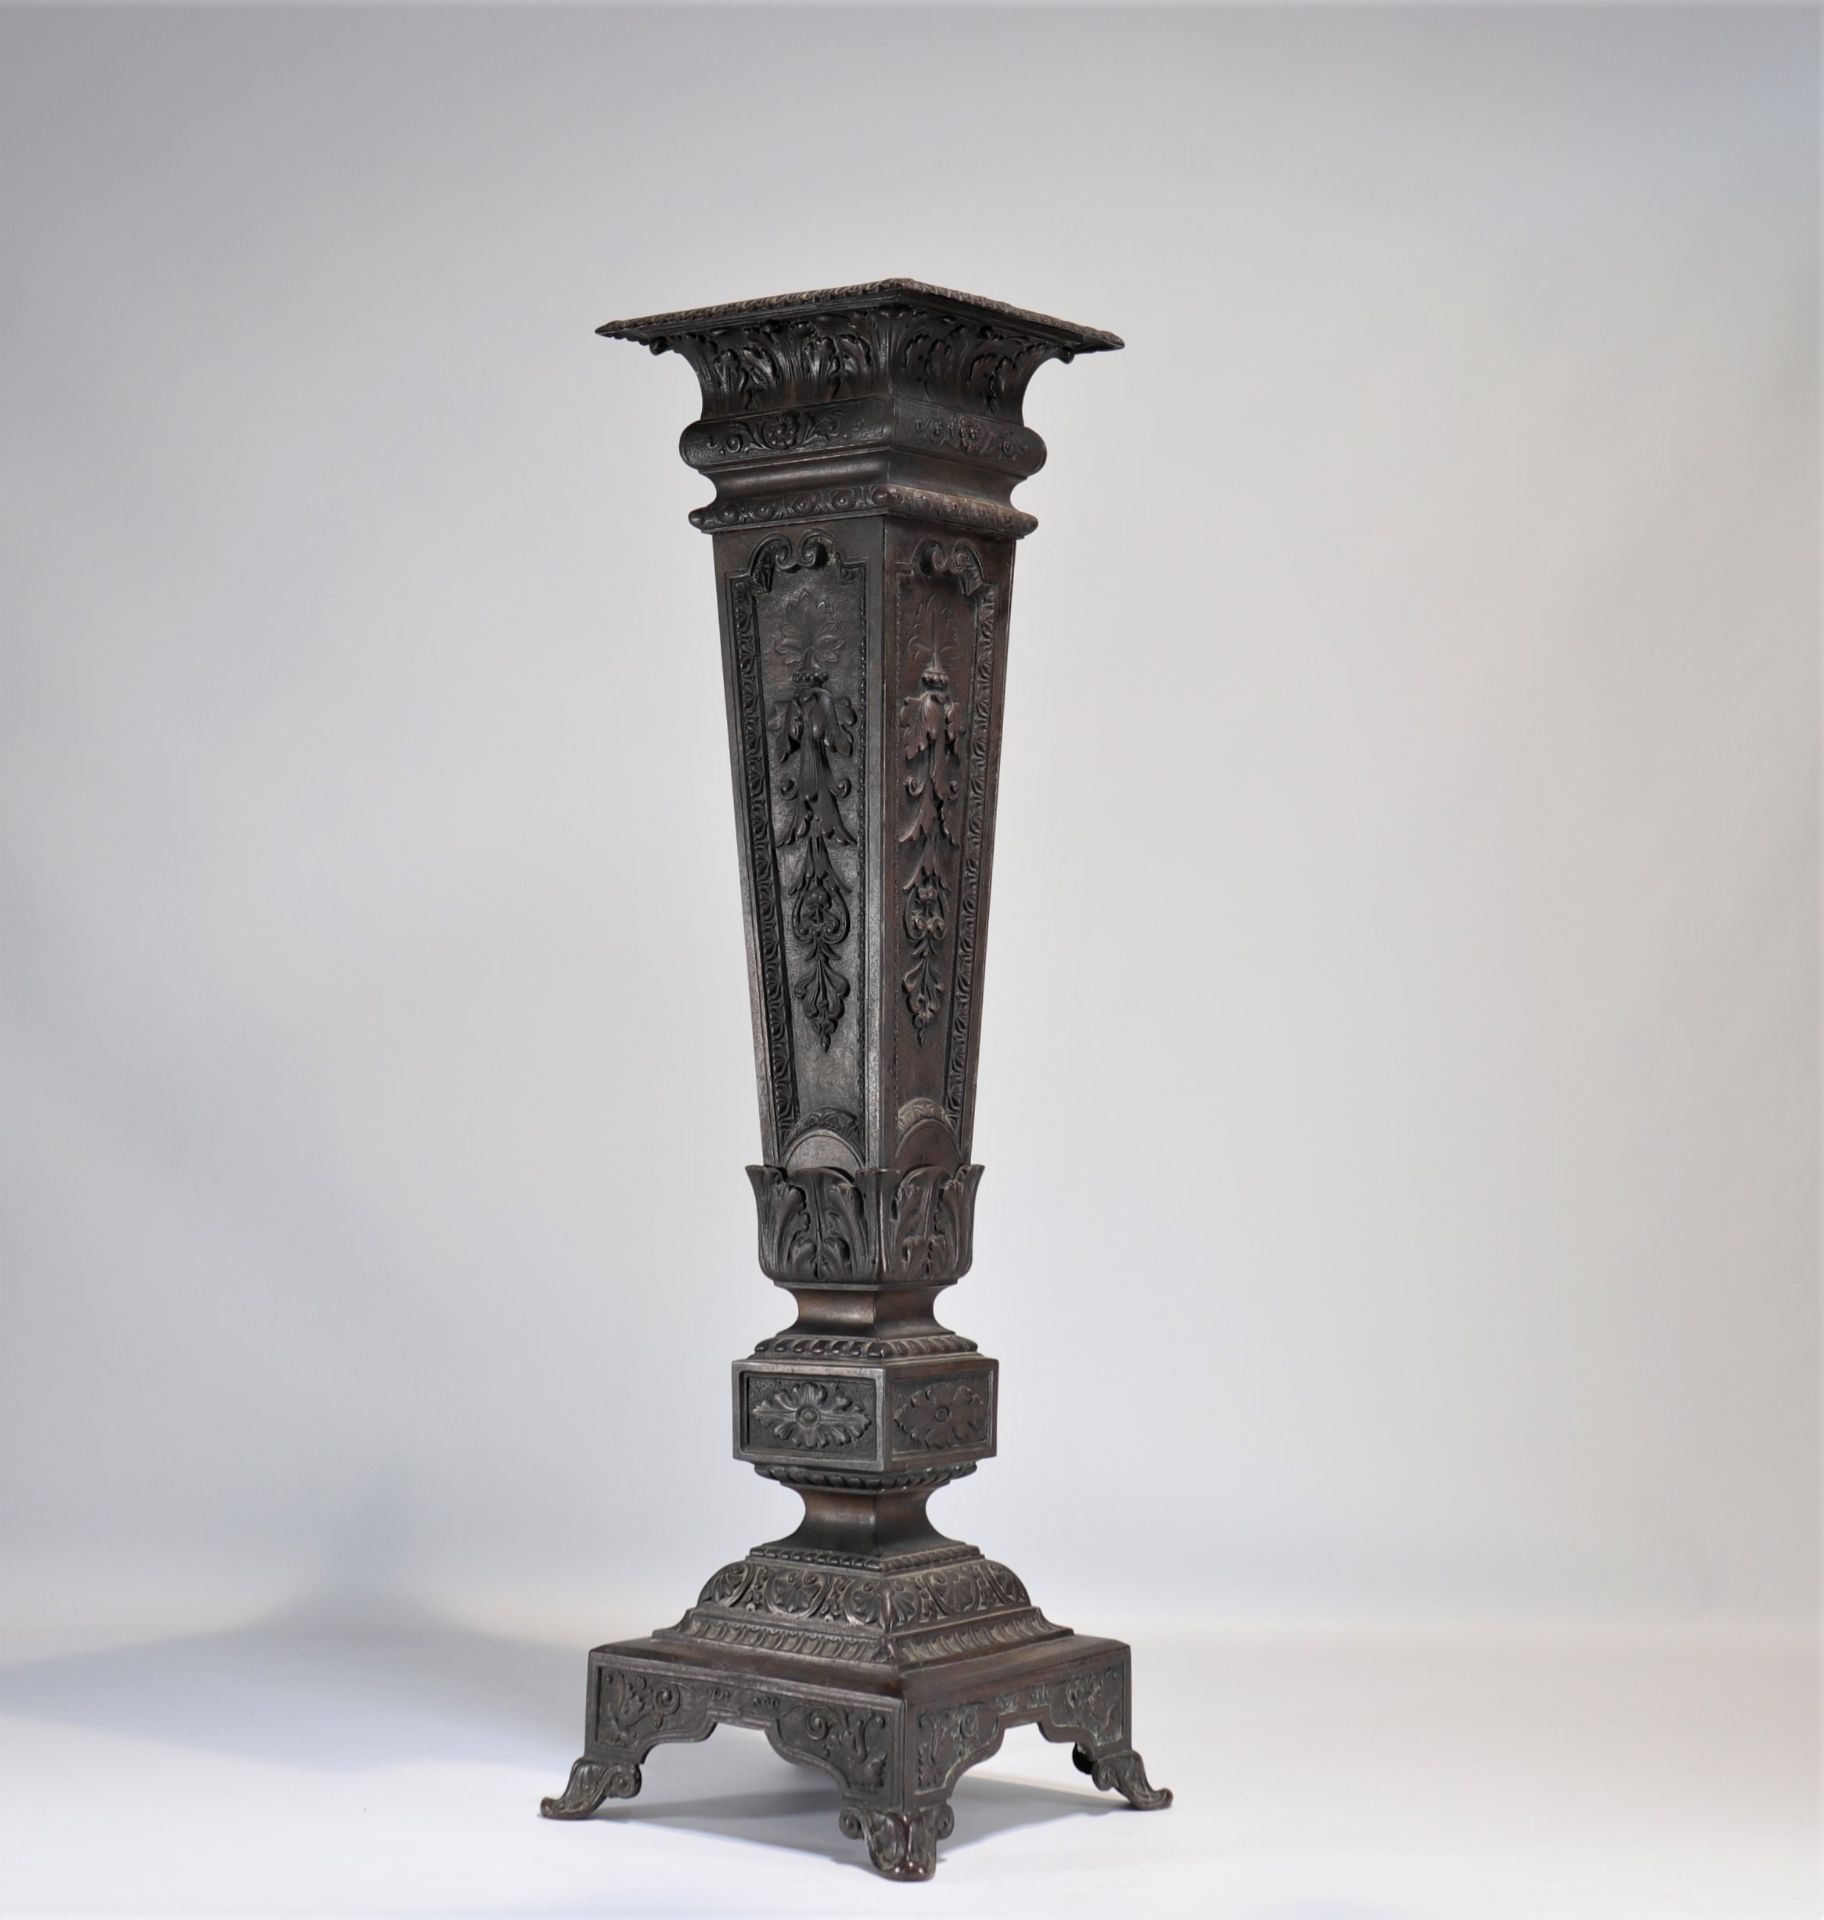 Bronze column saddle decorated with foliage from the 19th century